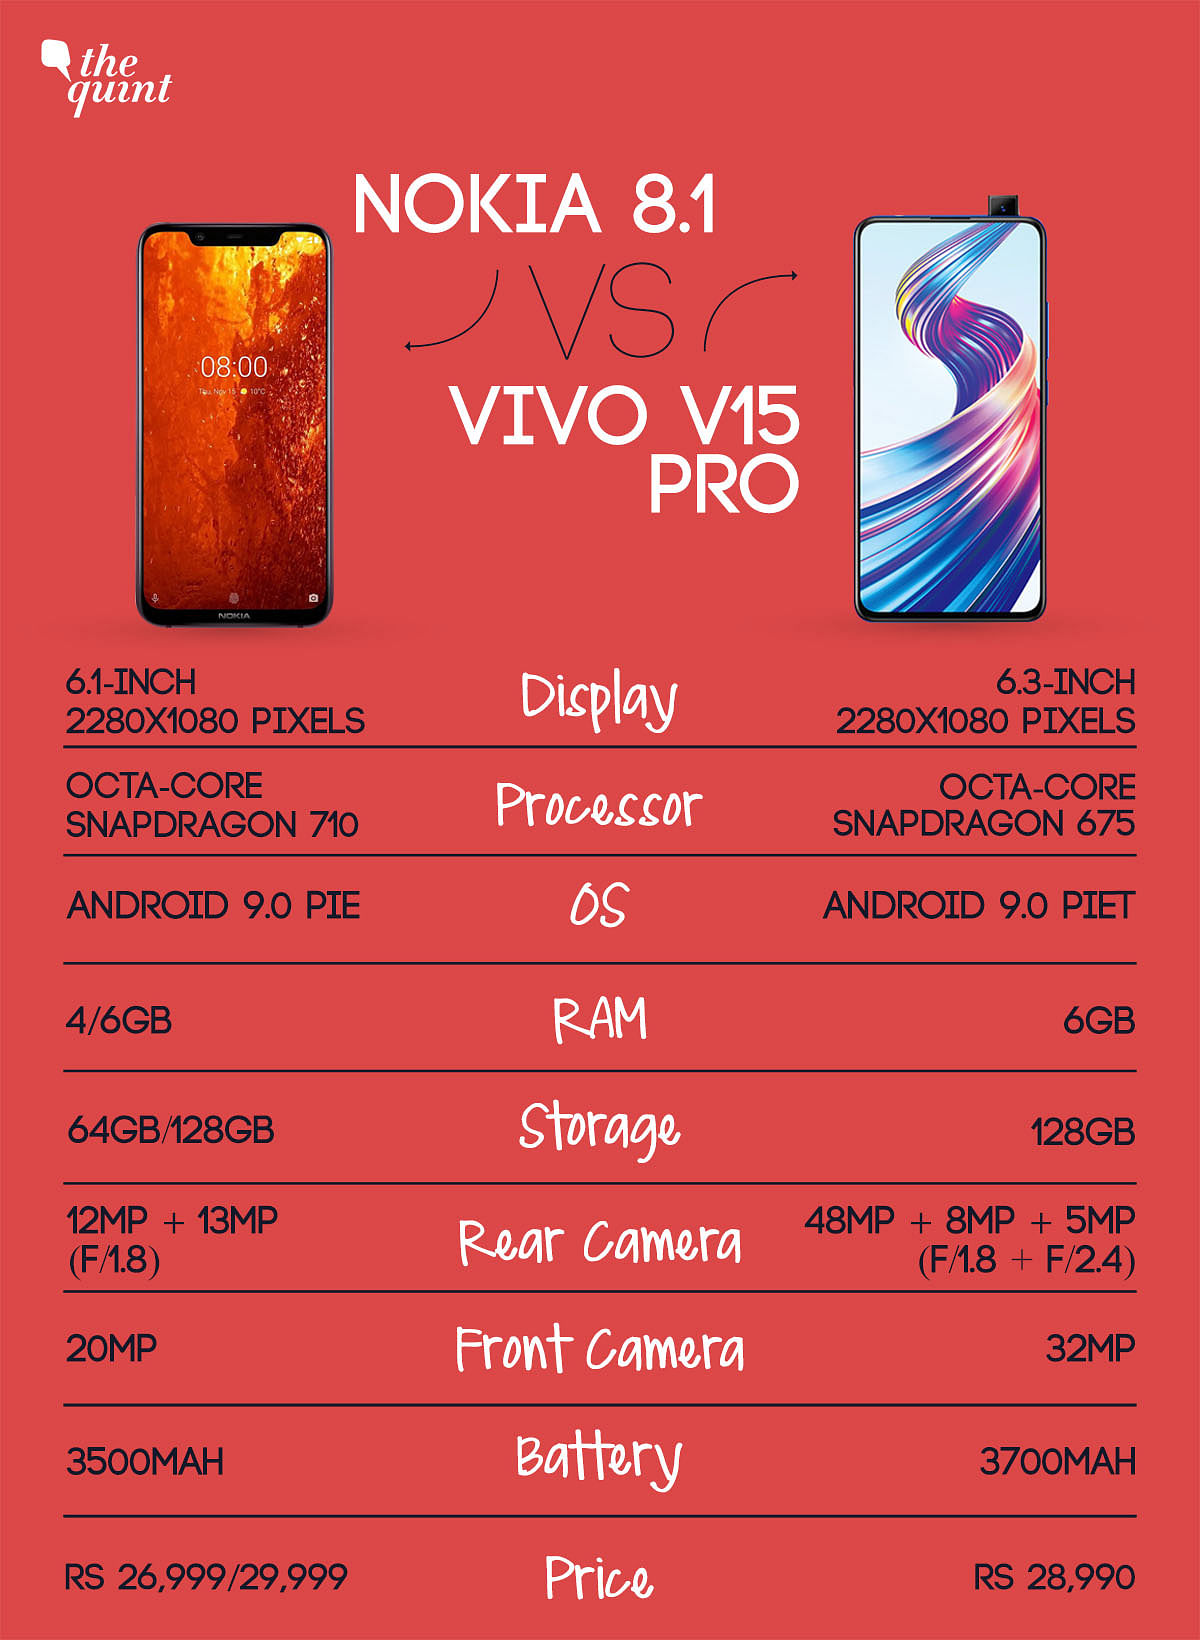 Nokia’a stock Android-totting 8.1 for under Rs 30K goes up against the Vivo V15 Pro which gets a pop-up camera.